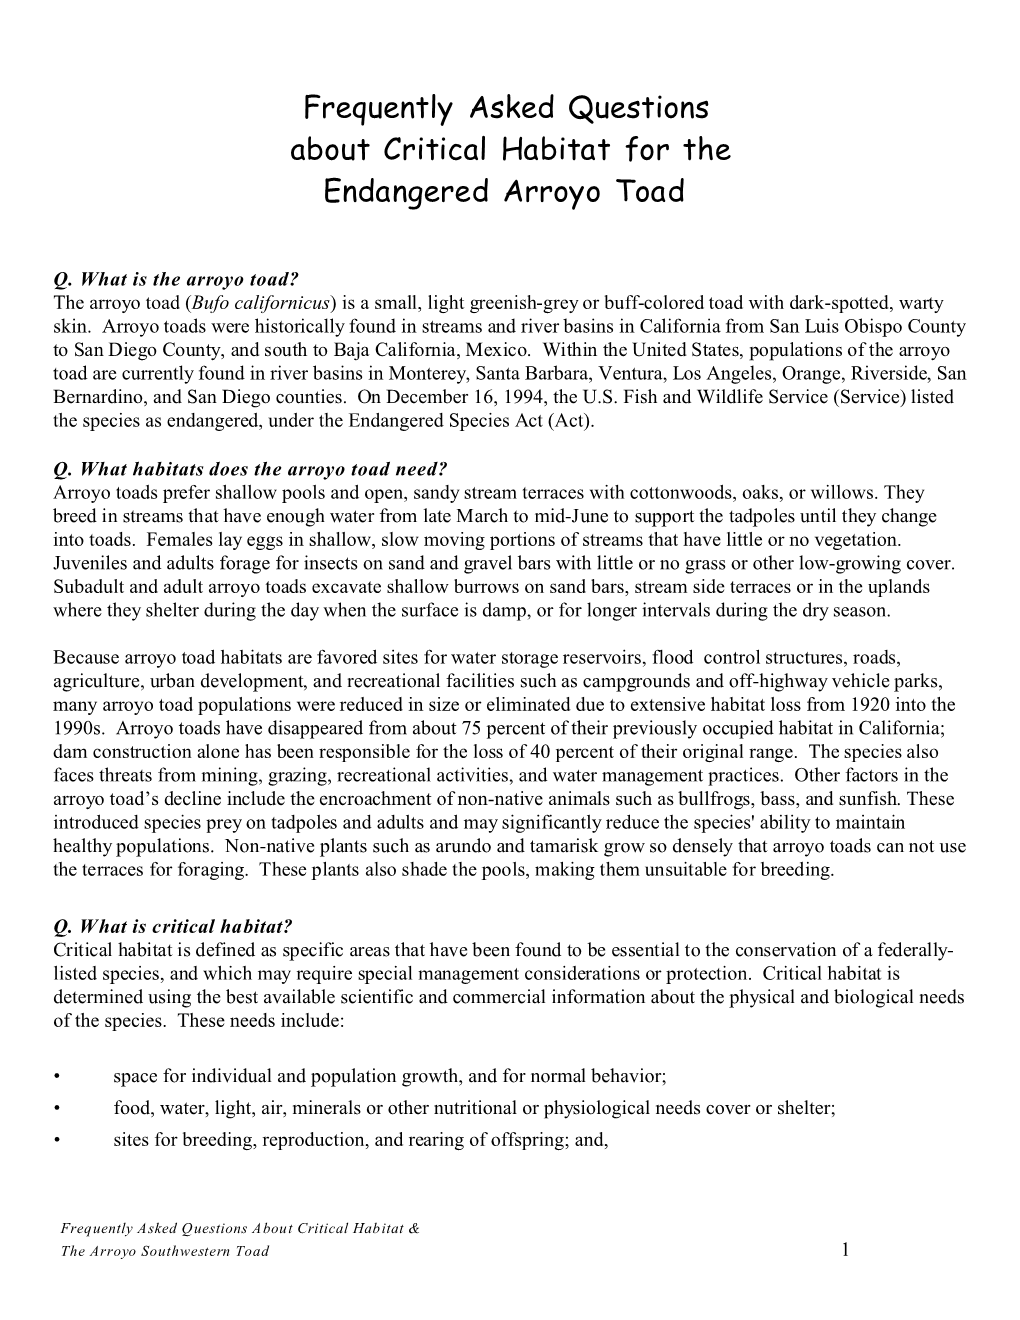 Frequently Asked Questions About Critical Habitat for the Endangered Arroyo Toad